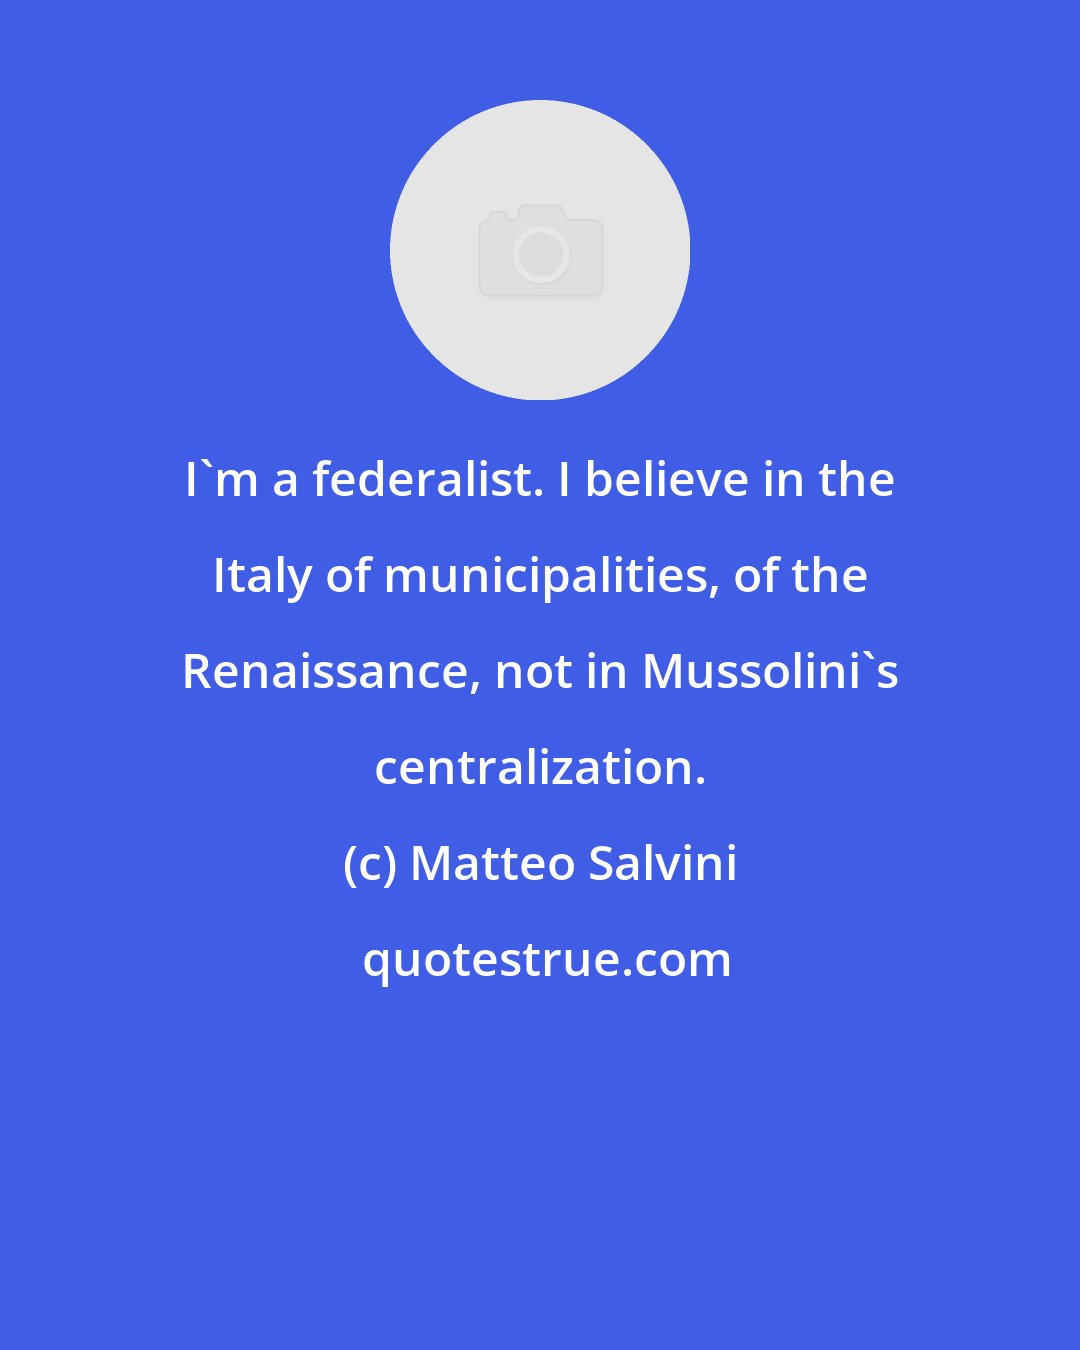 Matteo Salvini: I'm a federalist. I believe in the Italy of municipalities, of the Renaissance, not in Mussolini's centralization.